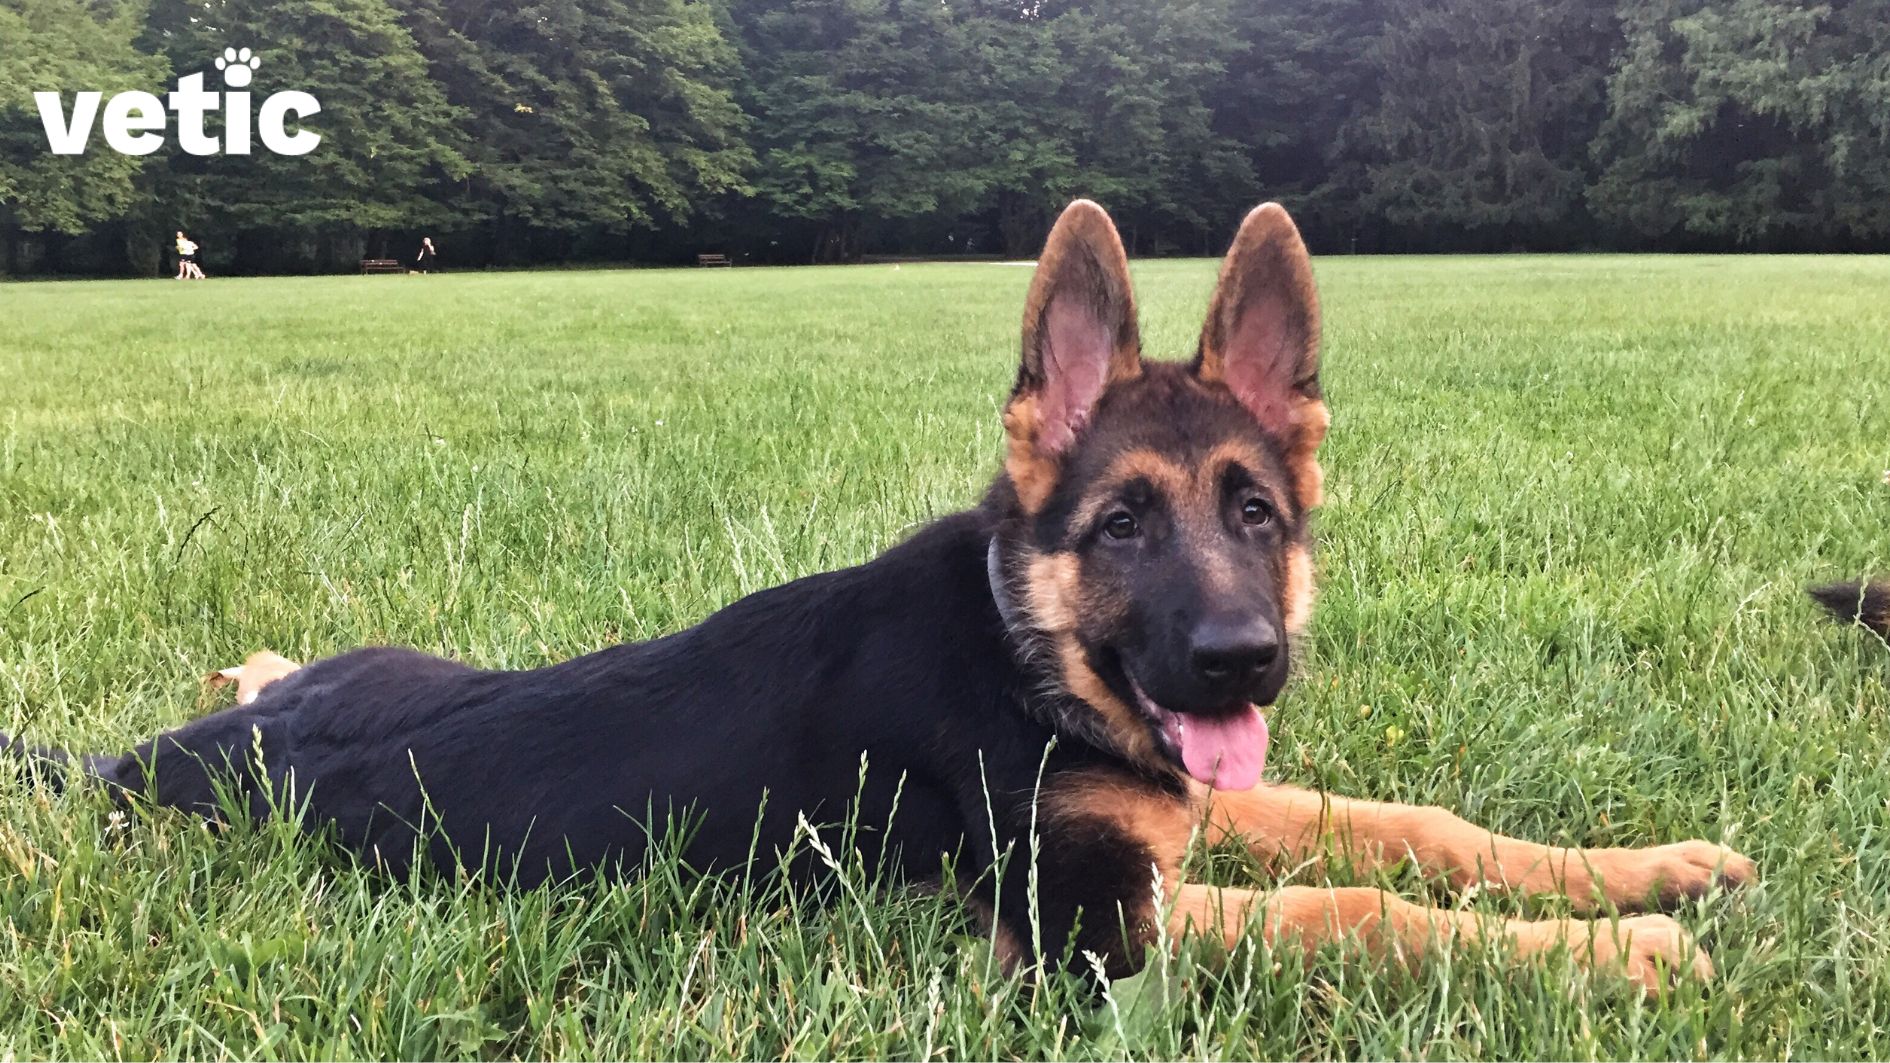 An adult German Shepherd laying on the grass with the front legs sprawled in front but head held high. They are looking directly at the camera and their ears are perked up. Lots of trees are visible in the background.